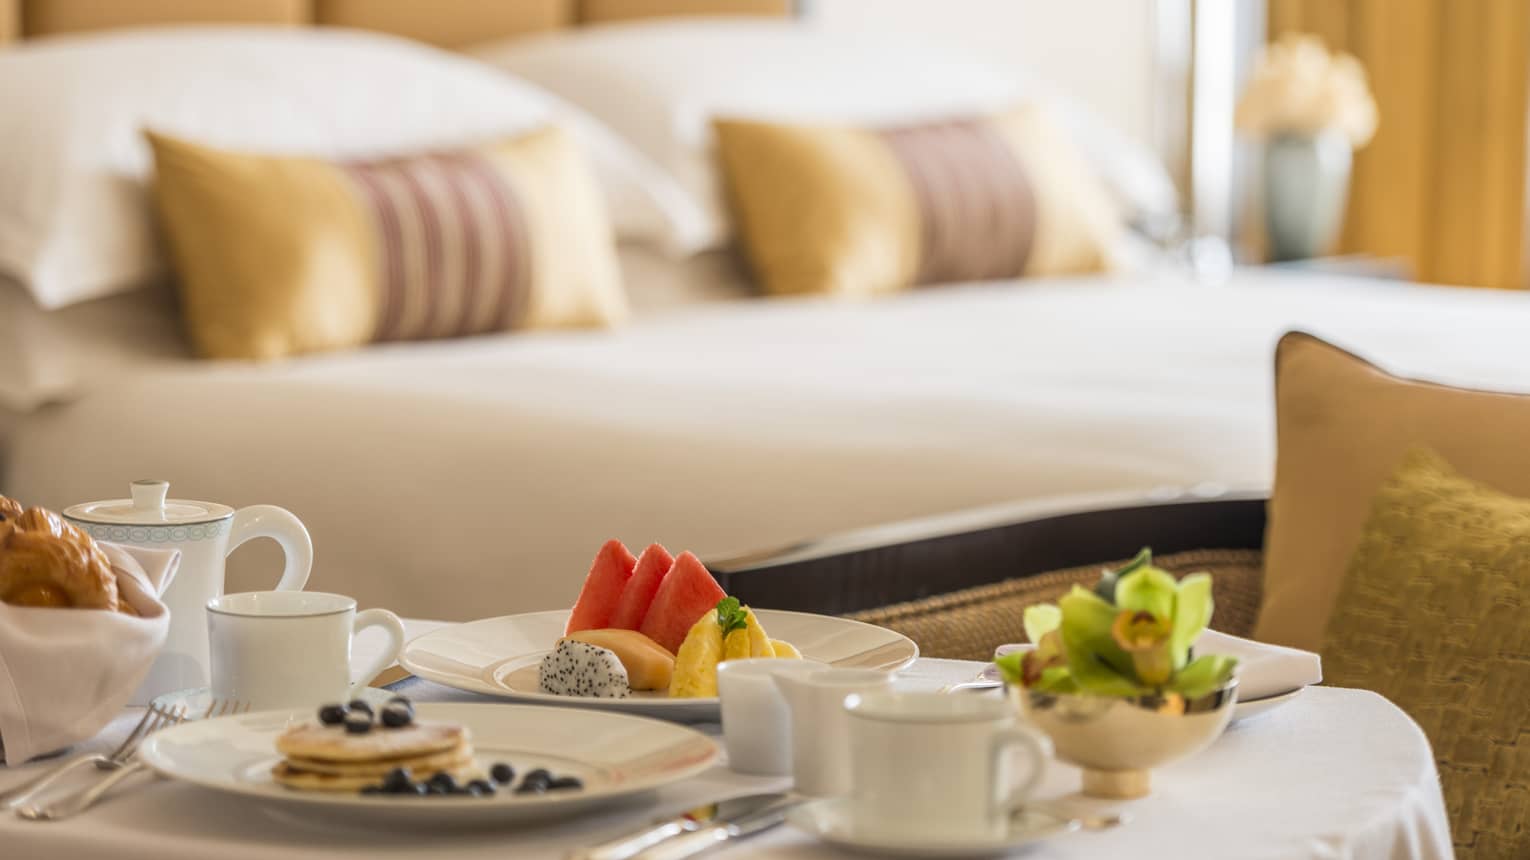 Pancakes, coffee, fresh fruit breakfast items on in-room dining table in front of bed